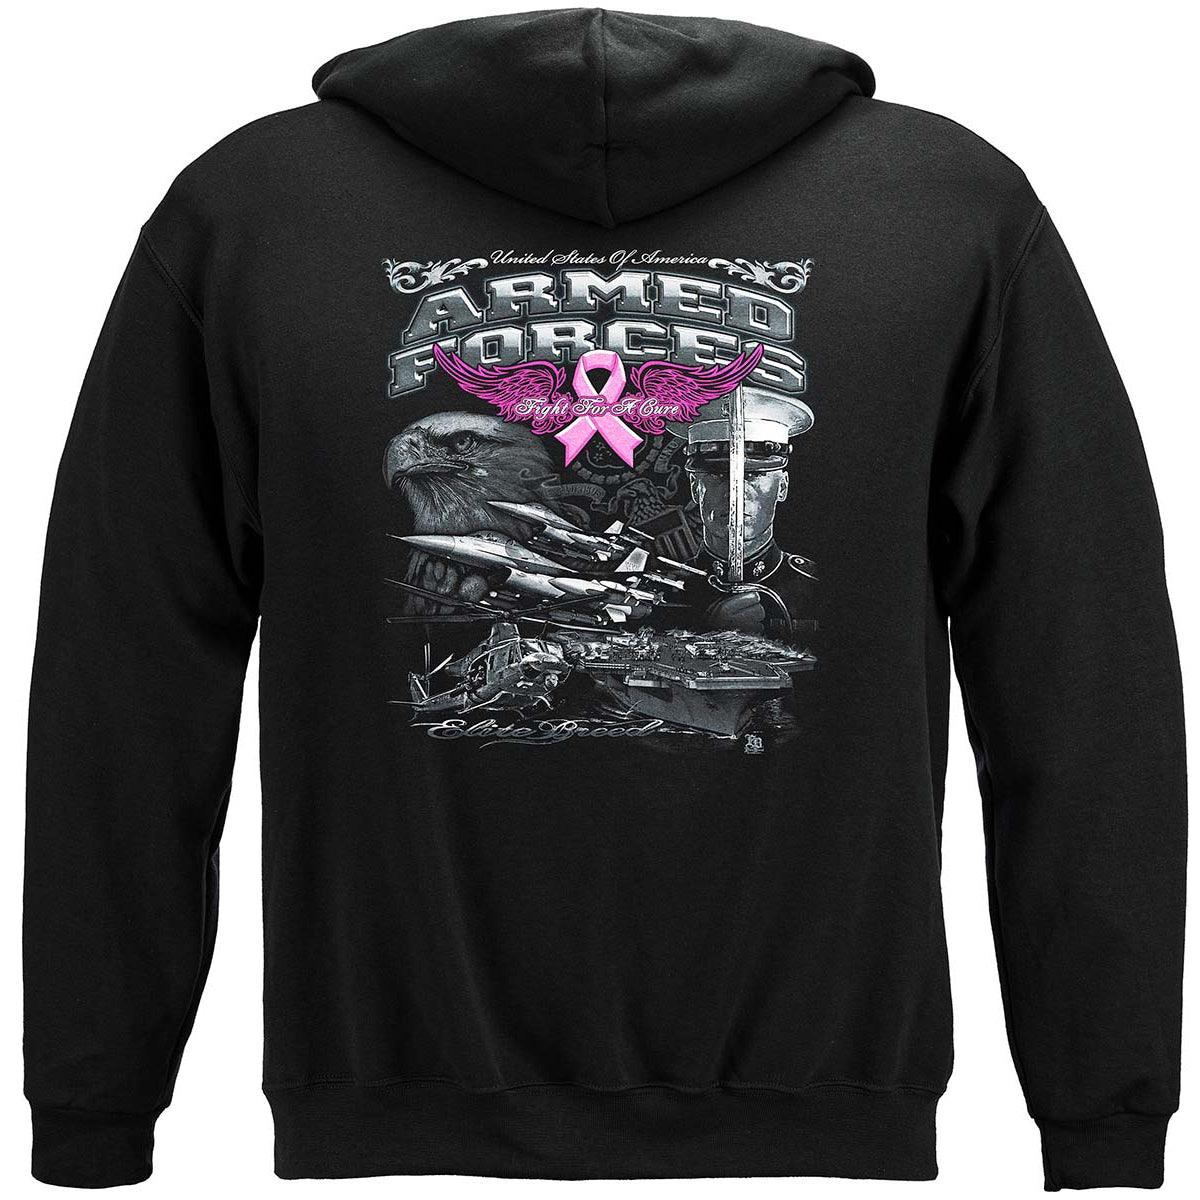 Armed Forces Elite Breed Breast Cancer Awareness T-Shirt - Military Republic